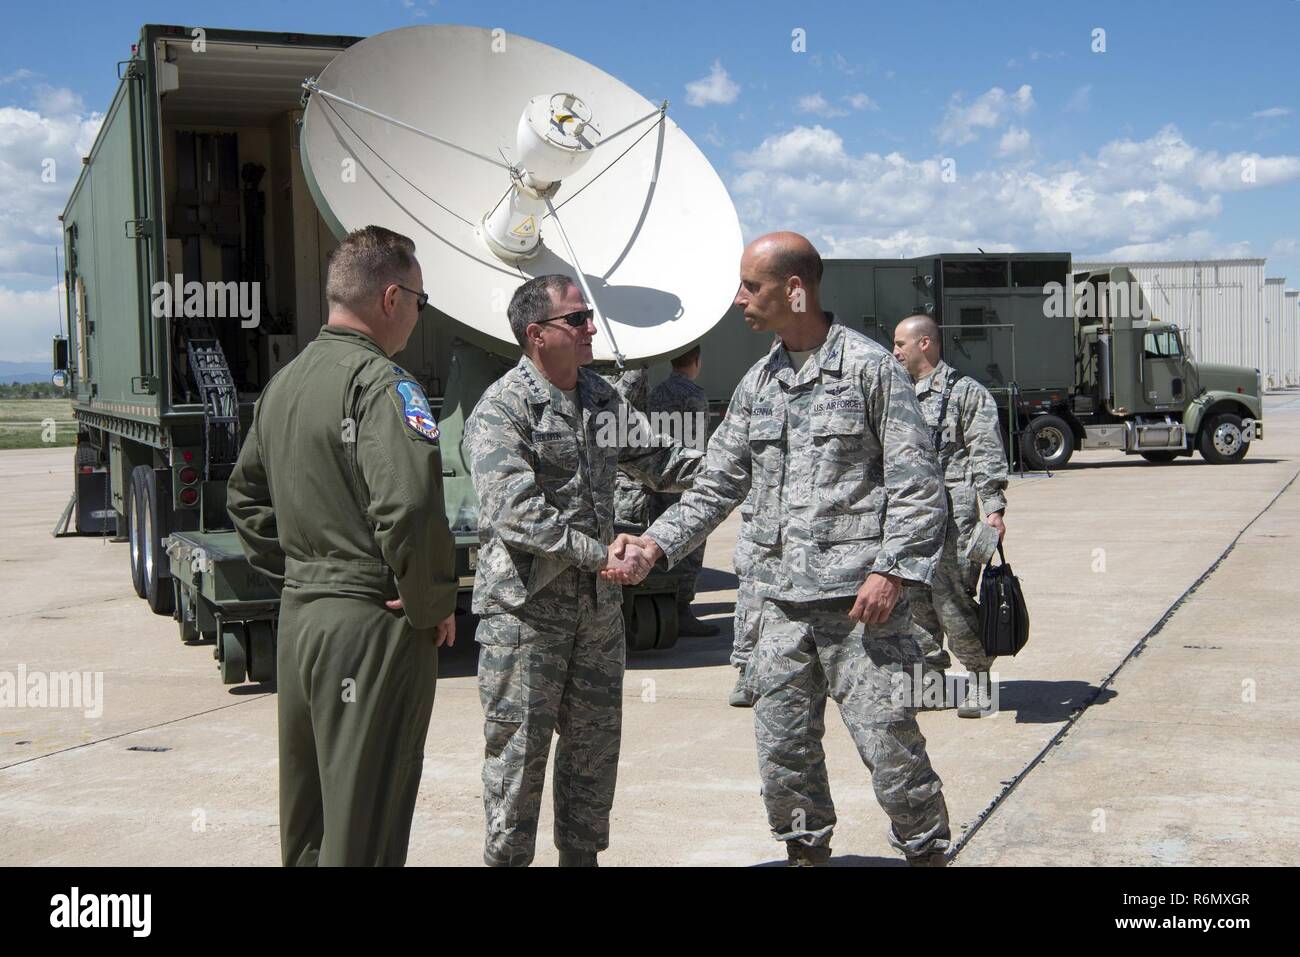 233d Space Group Commander Col Thomas H. McKenna (right) shakes U.S. Air Force Chief of Staff General David L. Goldfein’s hand after a short discussion while Goldfien visited Buckley Air Force Base, Colo. and toured several static displays May 25, 2017. The 140th Wing, Colorado Air National Guard took the opportunity to showcase assets from their various missions to include the F-16C Fighting Falcon aircraft, the Mission Vehicle and Communications Vehicle from the 233d Space Group's Mobile Ground System, the 140th Explosive Ordnance Disposal Flight's Bomb Squad Emergency Response Vehicle and T Stock Photo